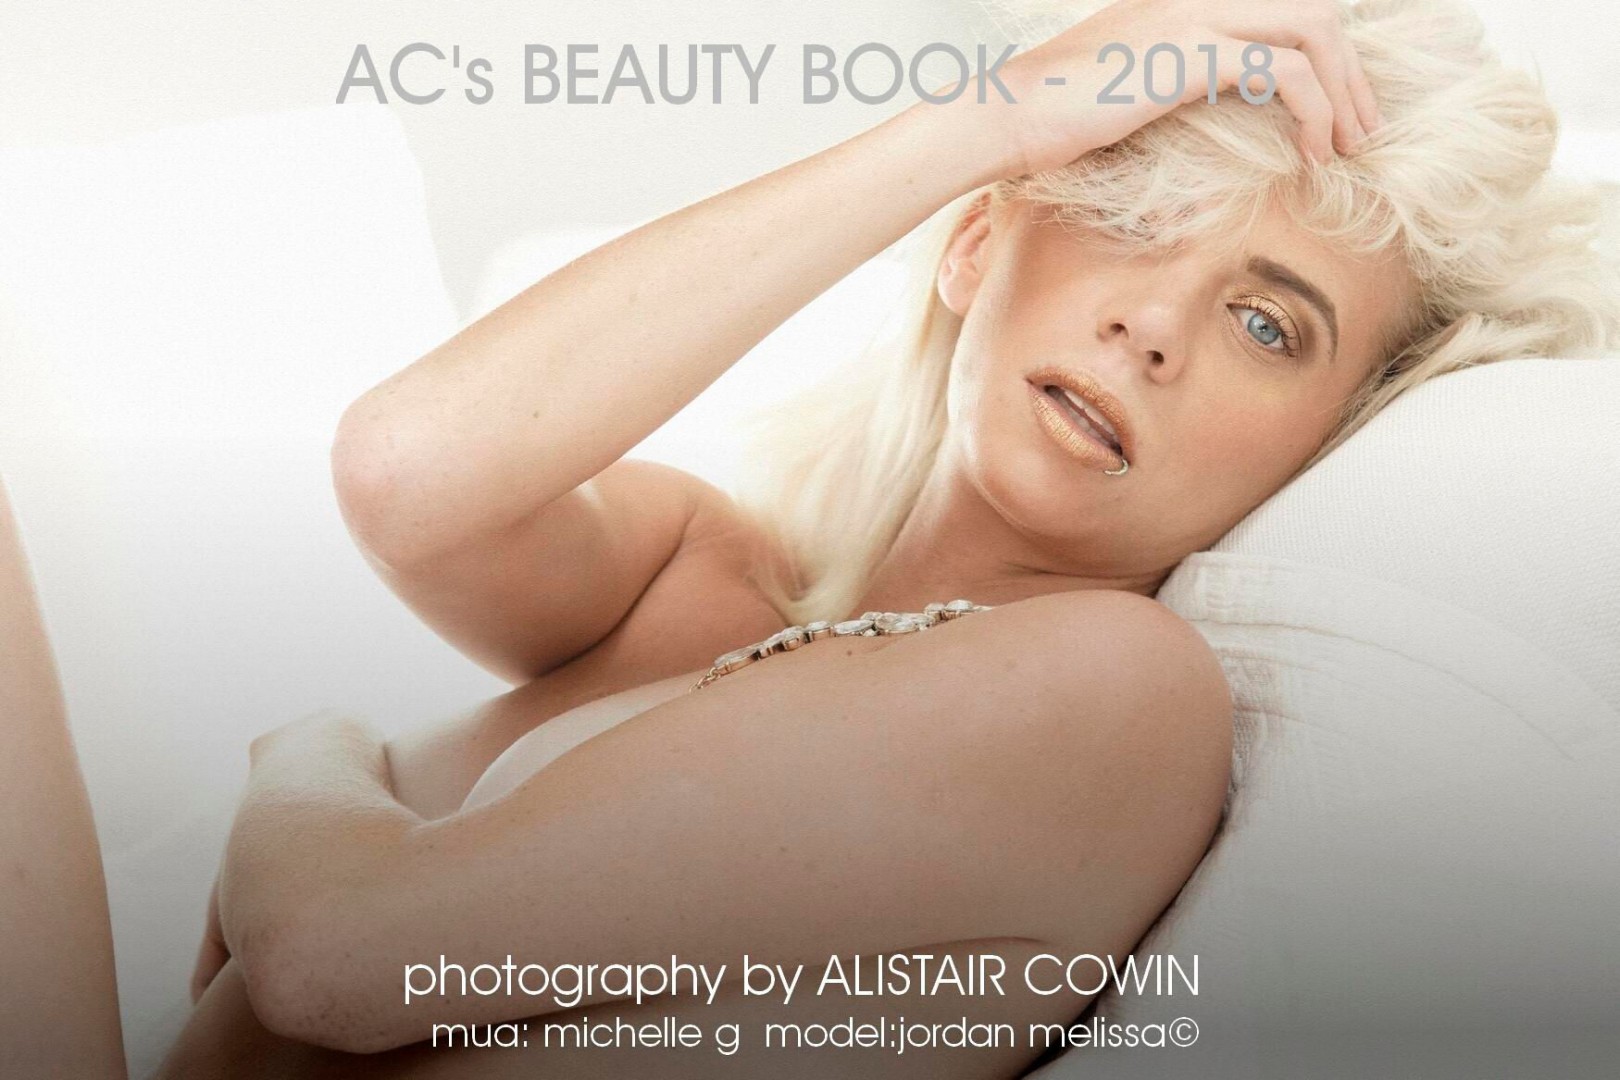 Photo taken for model's Portfolio and Alistair Cowin's Beauty Books